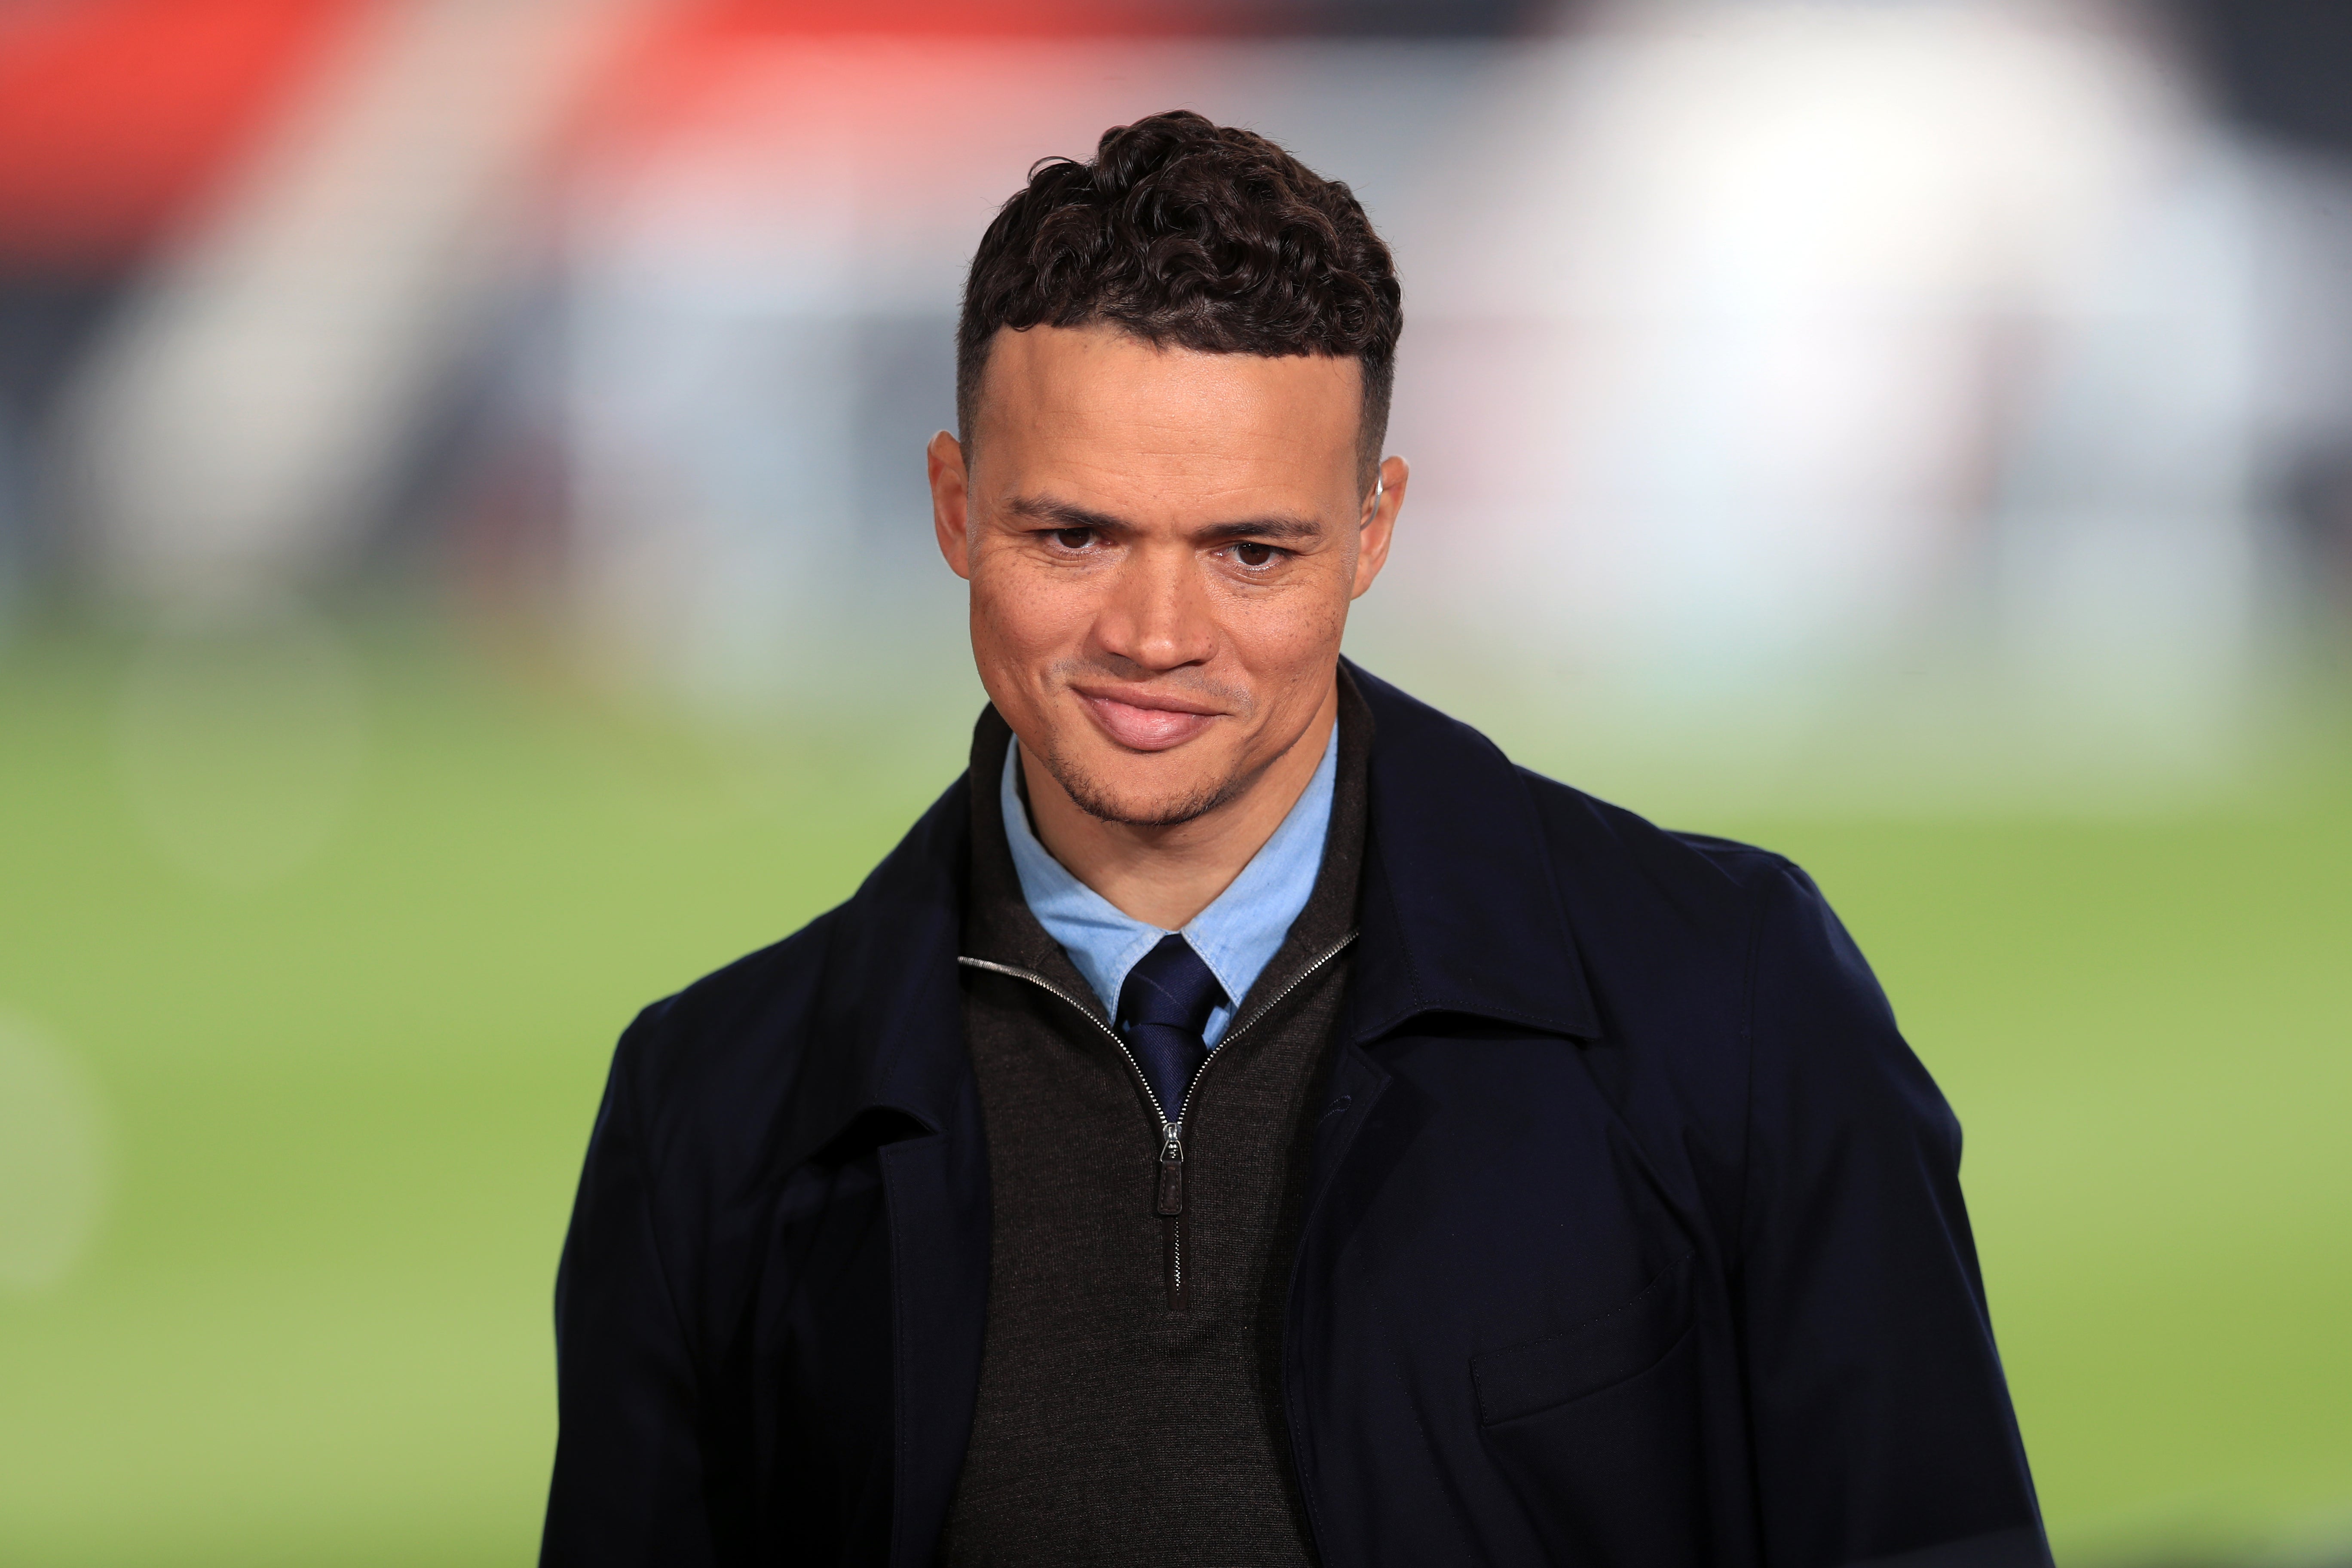 Football Pundit Jermaine Jenas Accused Of Using Mobile Phone While Driving The Independent